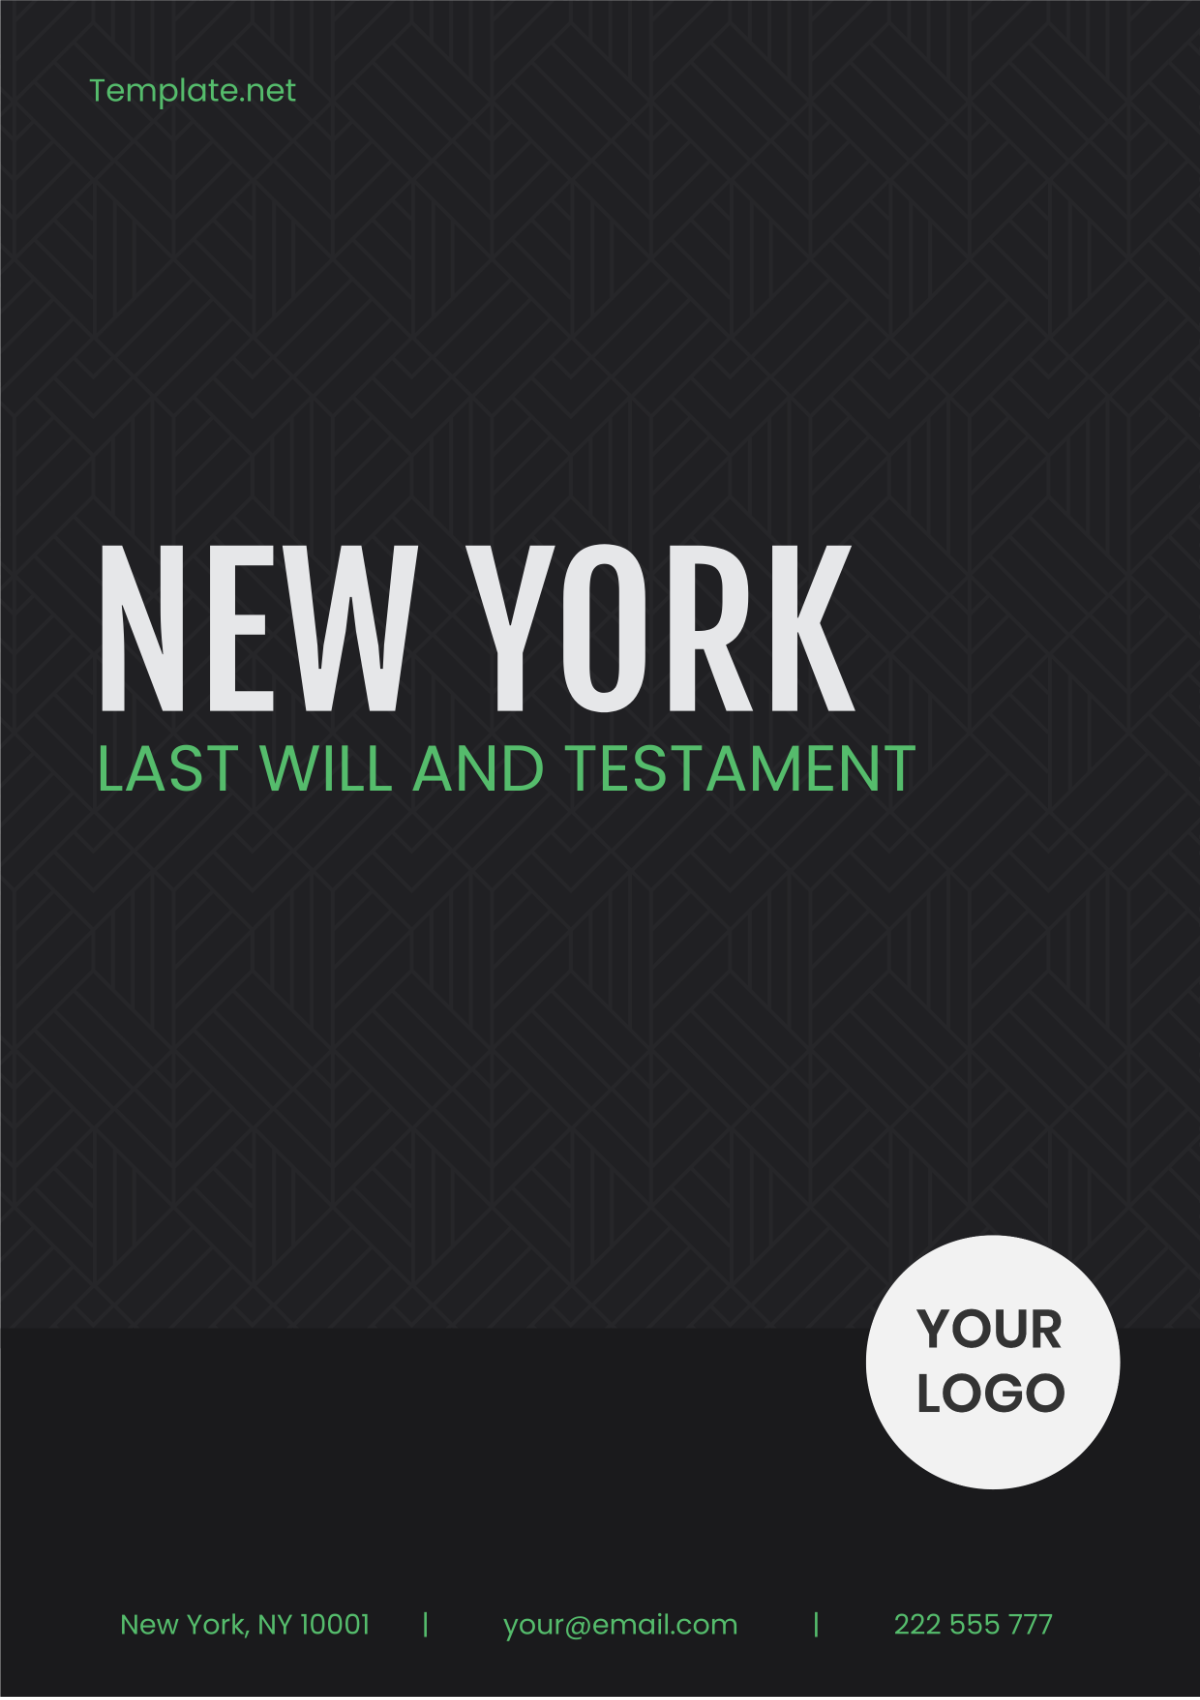 Free New York Last Will and Testament Template